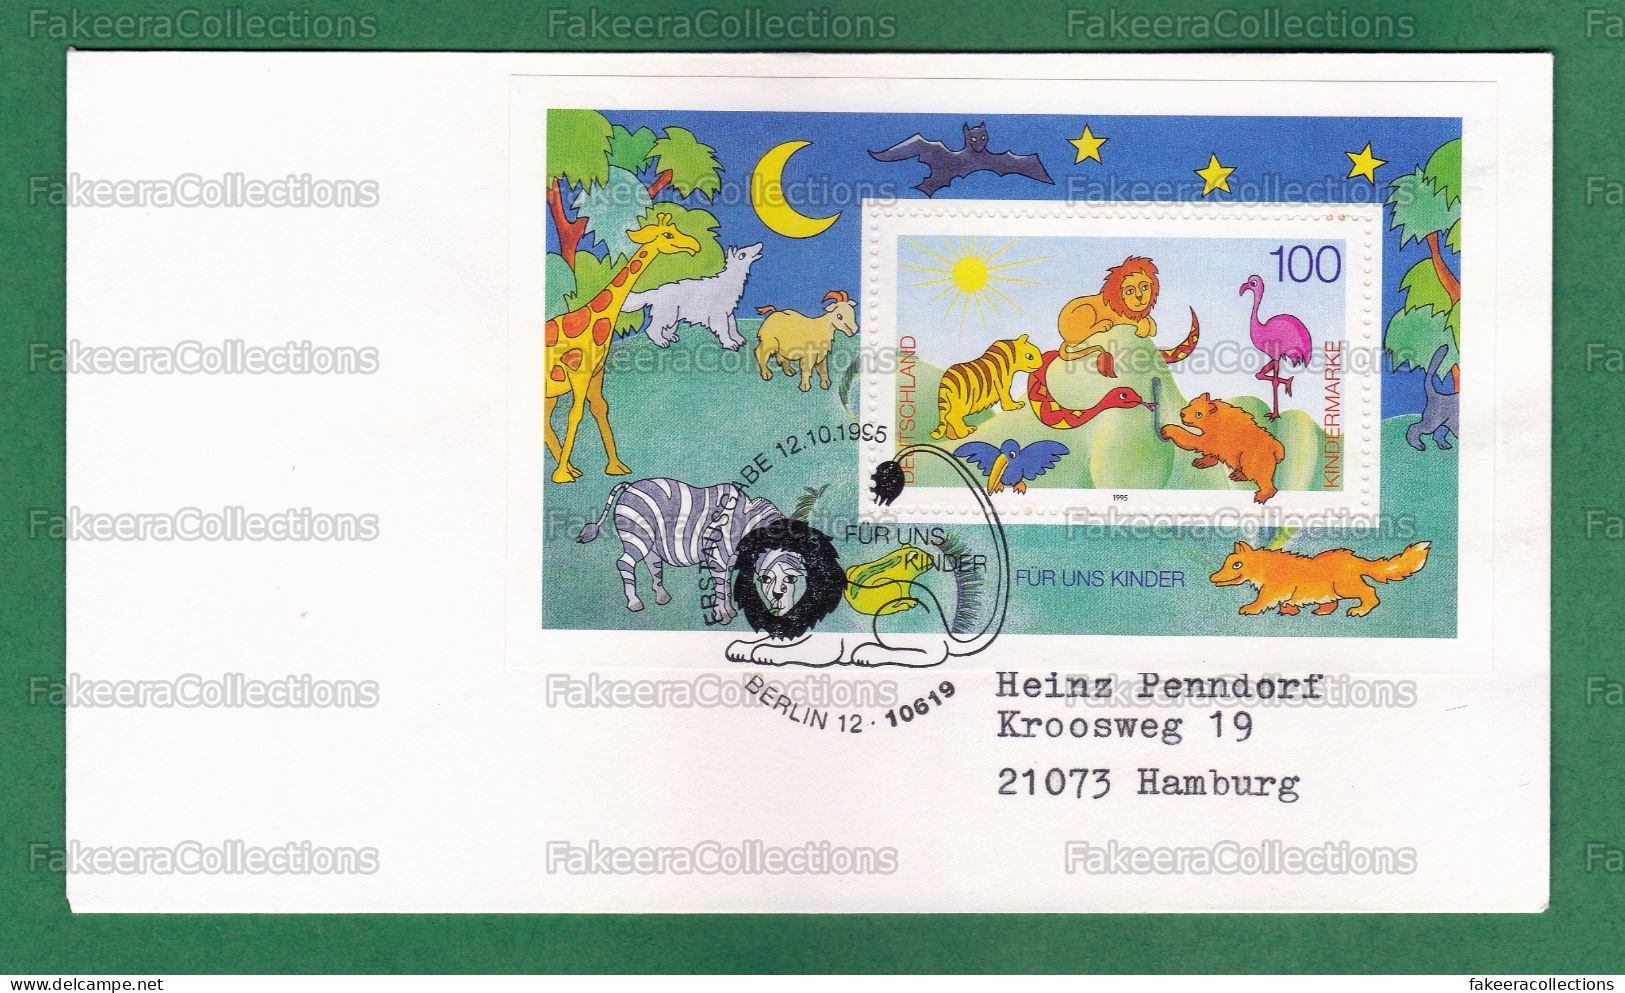 GERMANY 1995 - FOR THE CHILDREN 1v M/S FDC - Postal Used On Date Of Issue - Animals, TIGER, LION, SNAKE, BEAR, BIRDS - Roofkatten